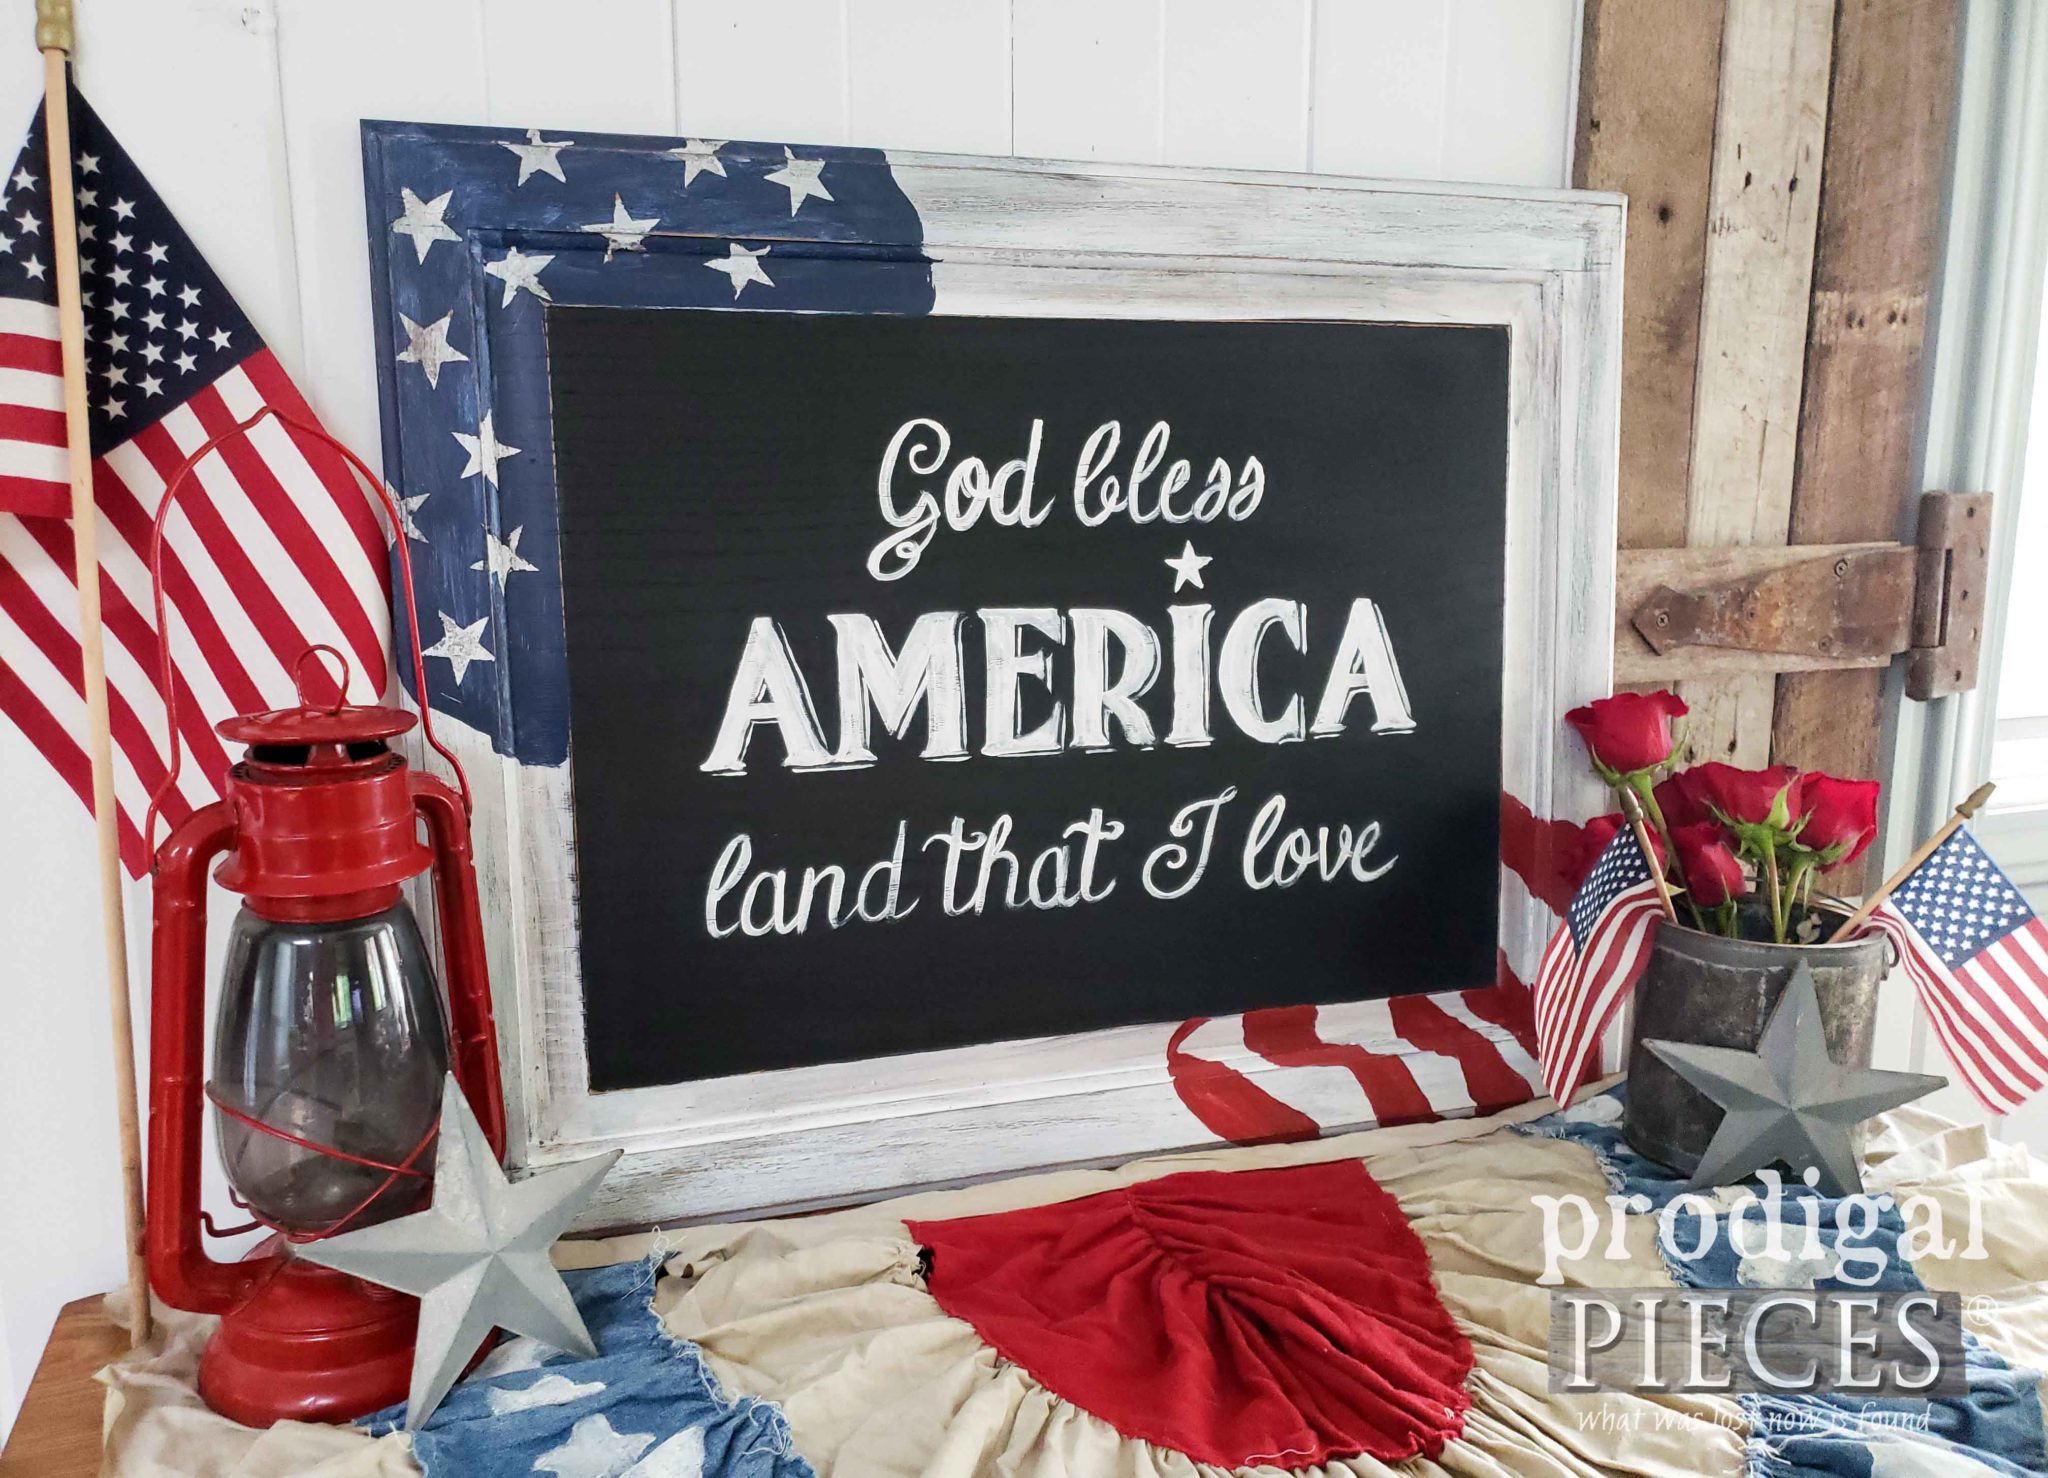 Upcycled Cupboard Door Turned Patriotic Sign | Video Tutorial by Larissa of Prodigal Pieces | prodigalpieces.com #prodigalpieces #diy #home #homedecor #farmhouse